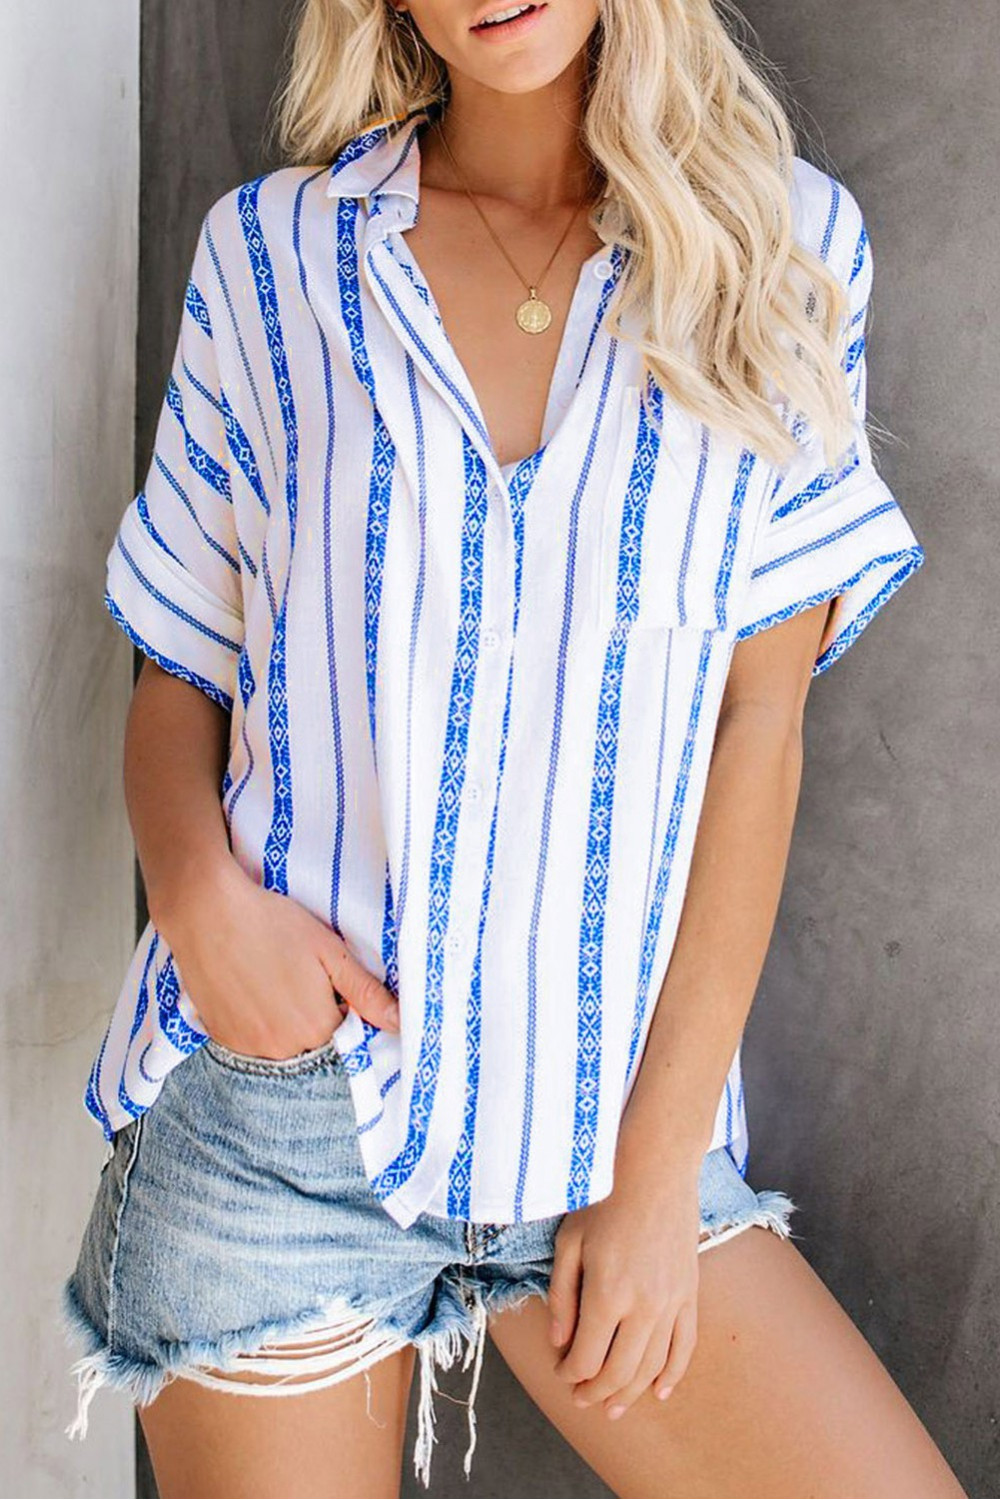 Blue and white striped shirt